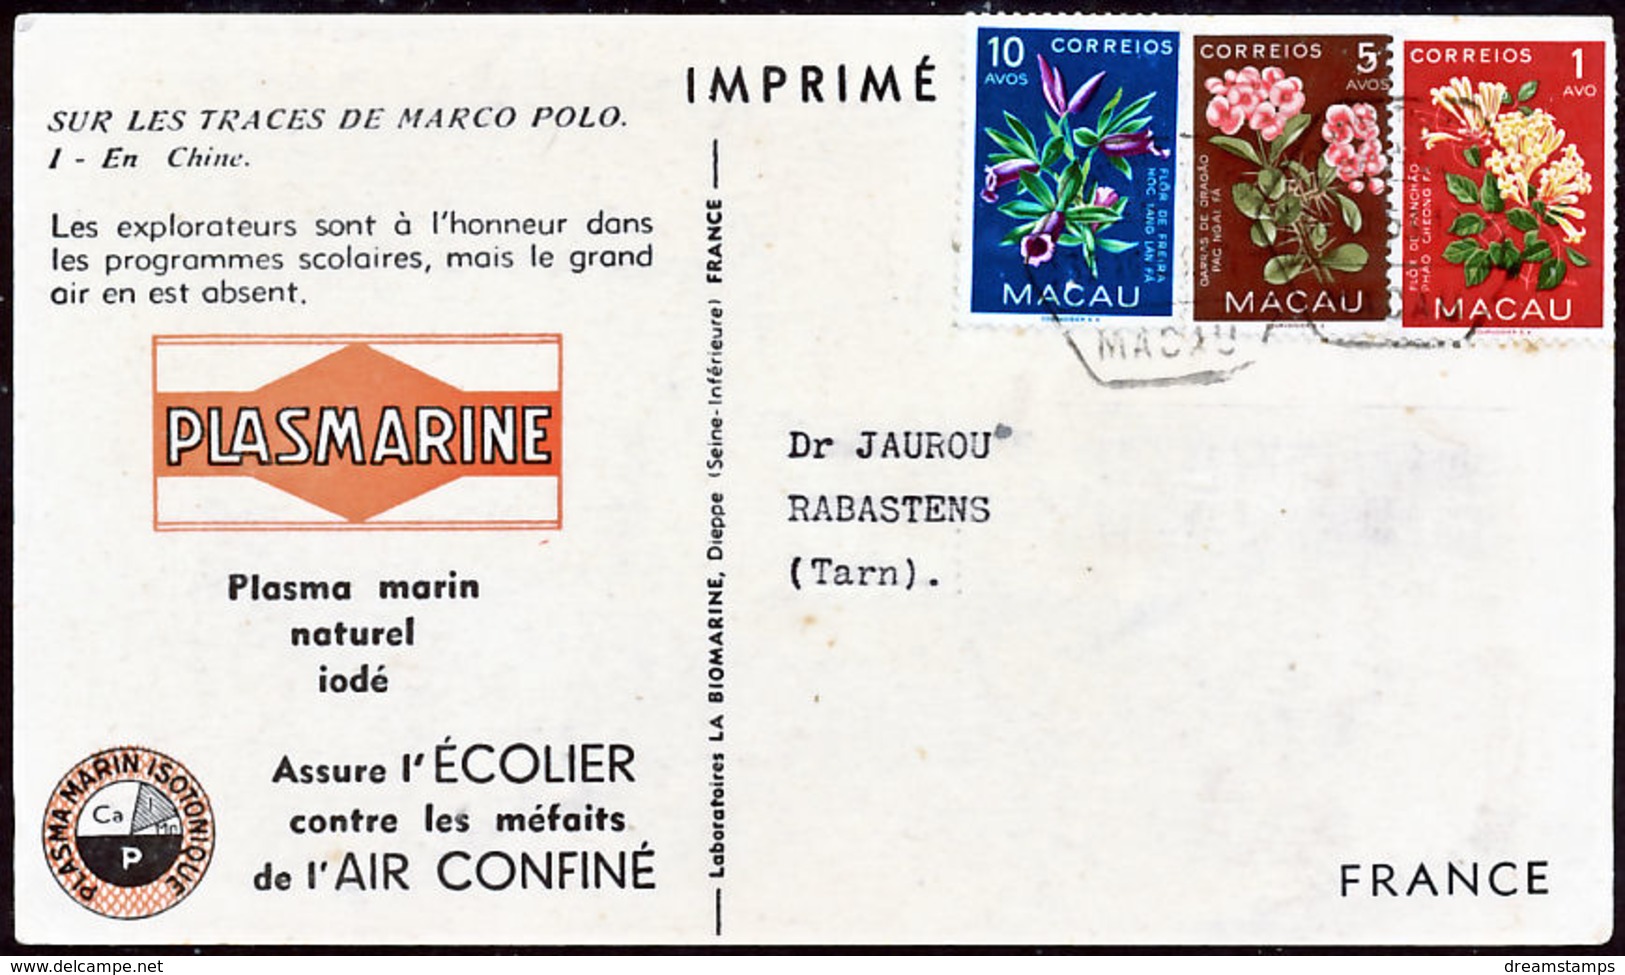 !										■■■■■ds■■ Macao 1953 Advertising Cover Rate 16 Avos To France Marco Polo Anf The Grand Khan (CO372) - Lettres & Documents